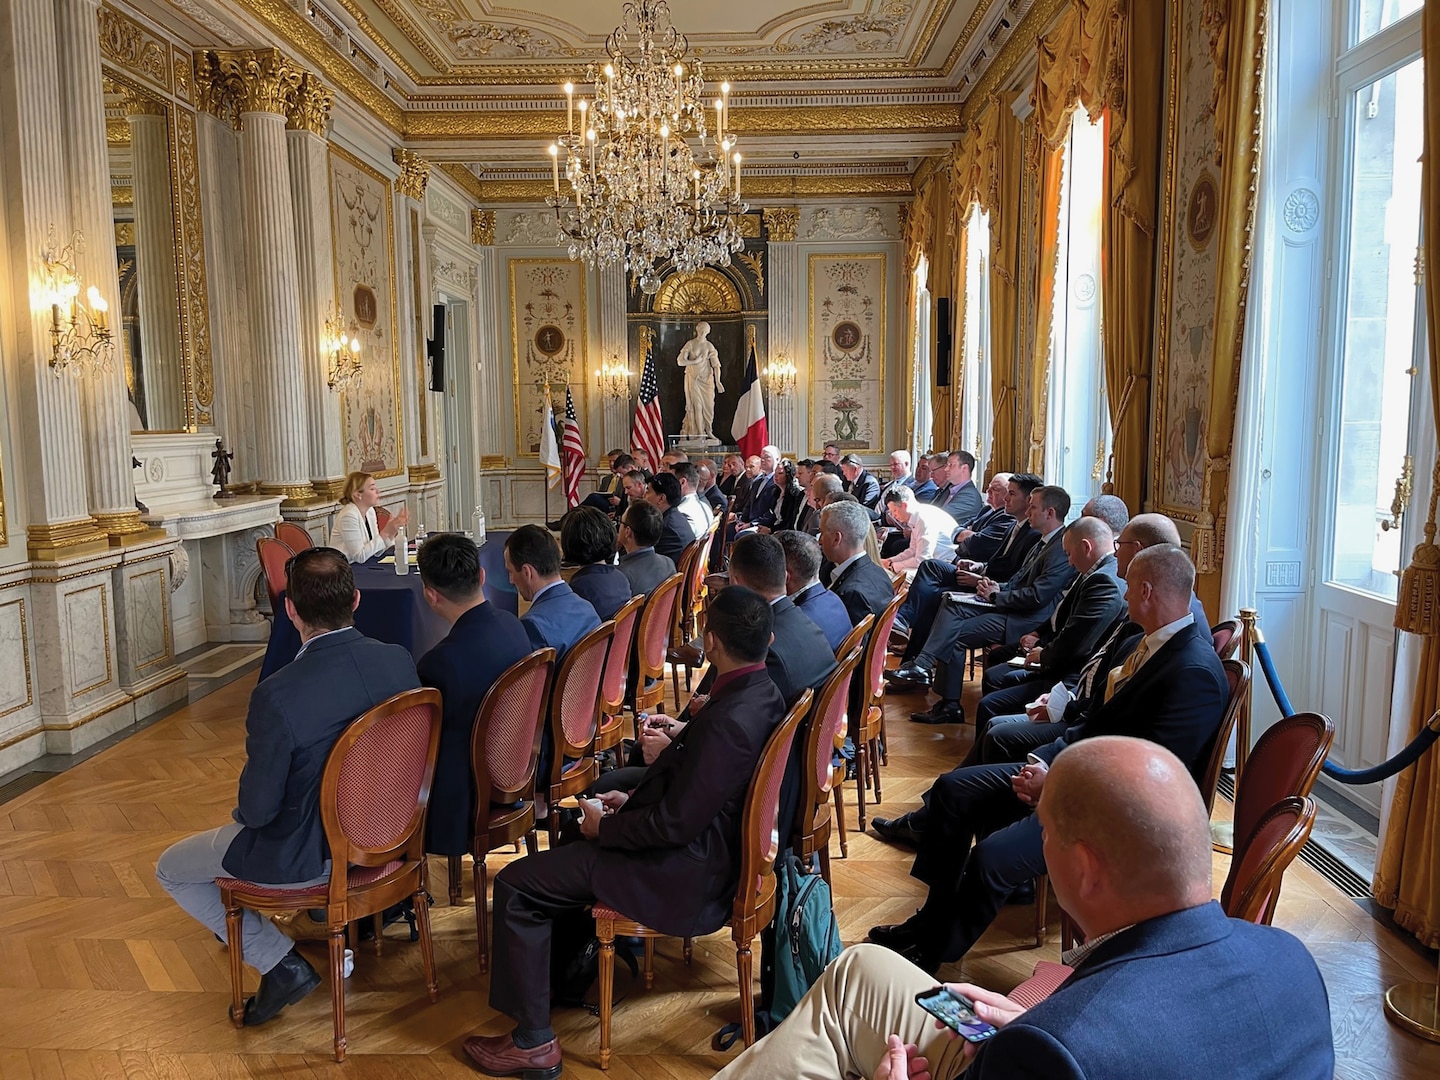 Joint Advanced Warfighting School students and faculty listen as Alexandra de Hoop Scheffer, director of Paris office of German Marshall Fund of the United States, presents “The Transatlantic Relationship Following Russia’s Invasion of
Ukraine,” in May 2022, at Hôtel de Talleyrand, George C. Marshall Center, Paris, France